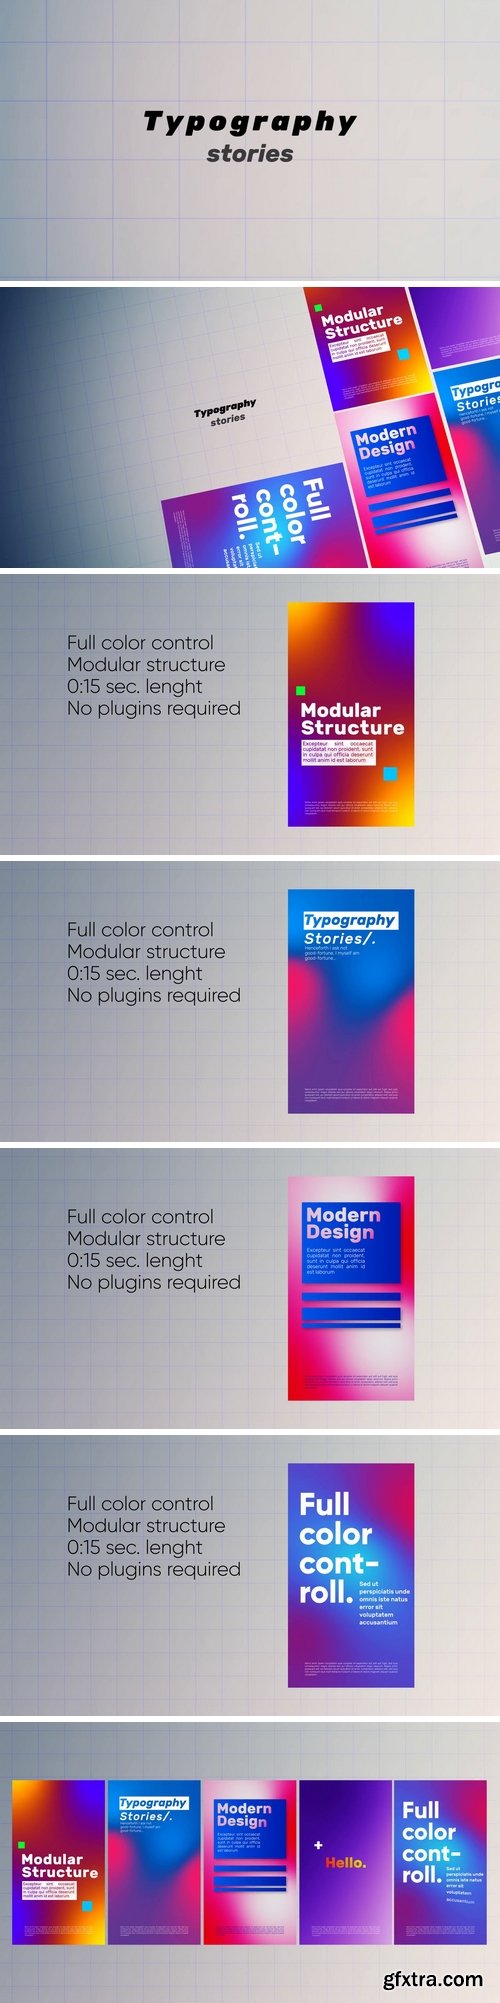 MA - Typography Stories After Effects Templates 151865